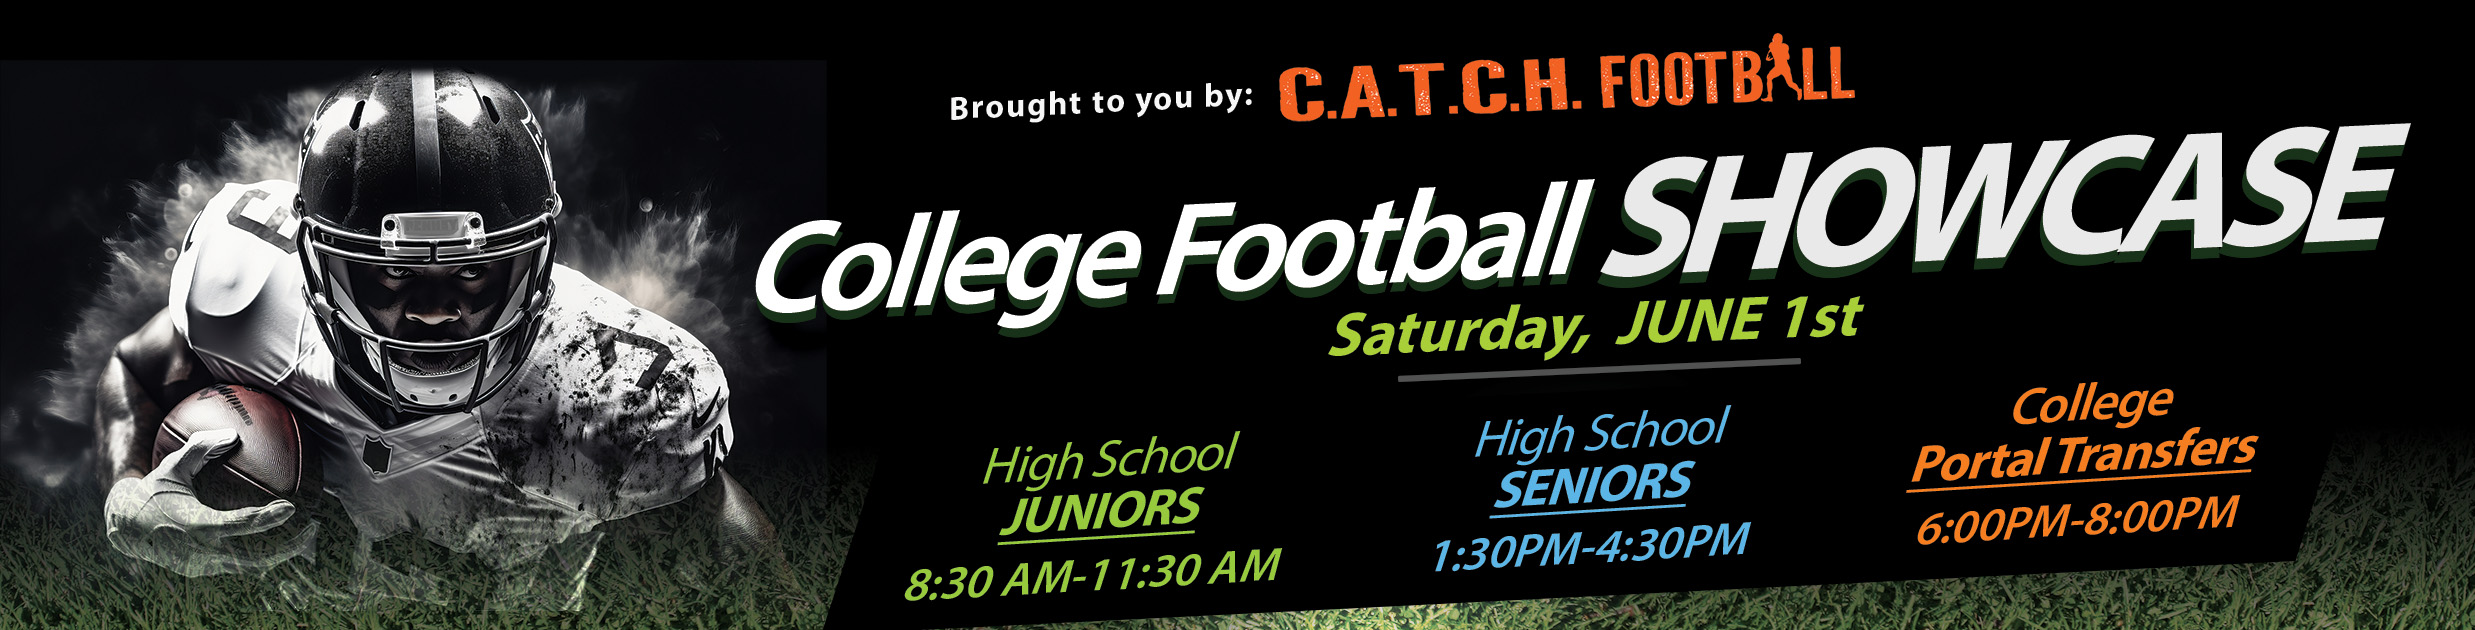 College Football Showcase brought to you by C.A.T.C.H Football Saturday, June 1st High School Juniors 8:30 a.m. - 11:30 a.m. High School Seniors 1:30 p.m.-4:30 p.m. College Portal Transfers 6:00 p.m. - 8:00 p.m.